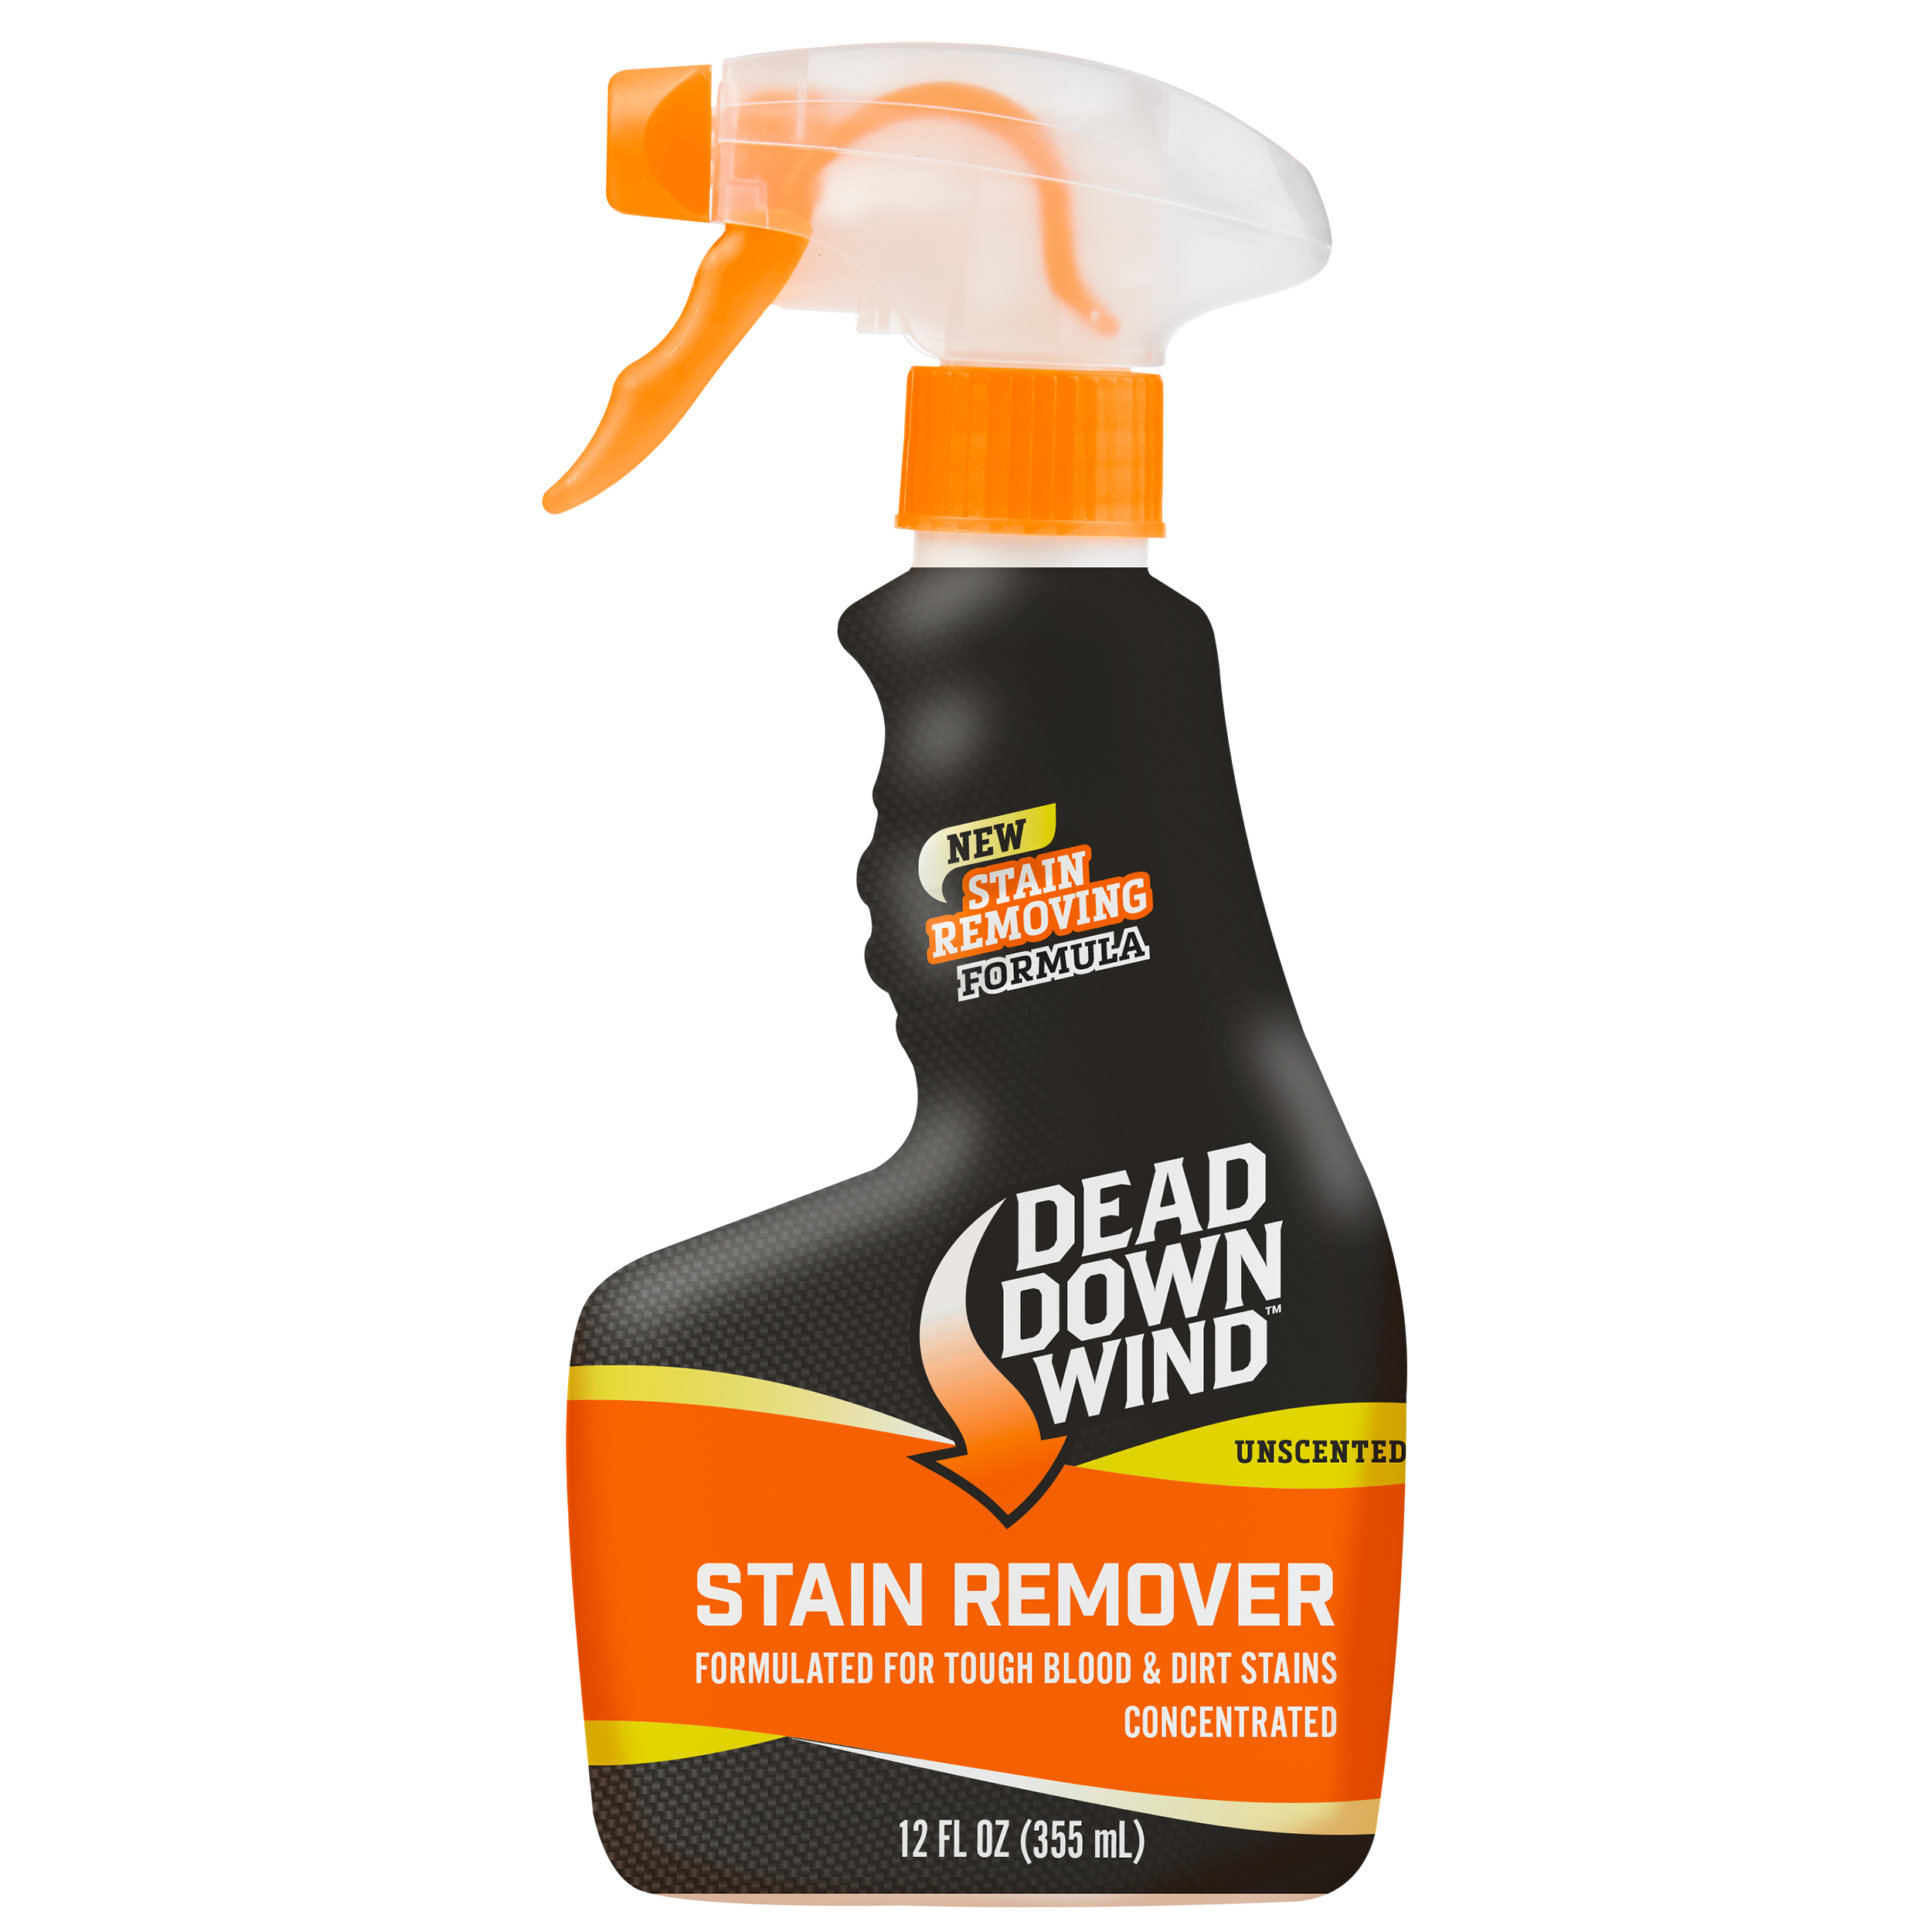 Dead Down Wind Stain Remover - 12 oz. - image 1 of 5